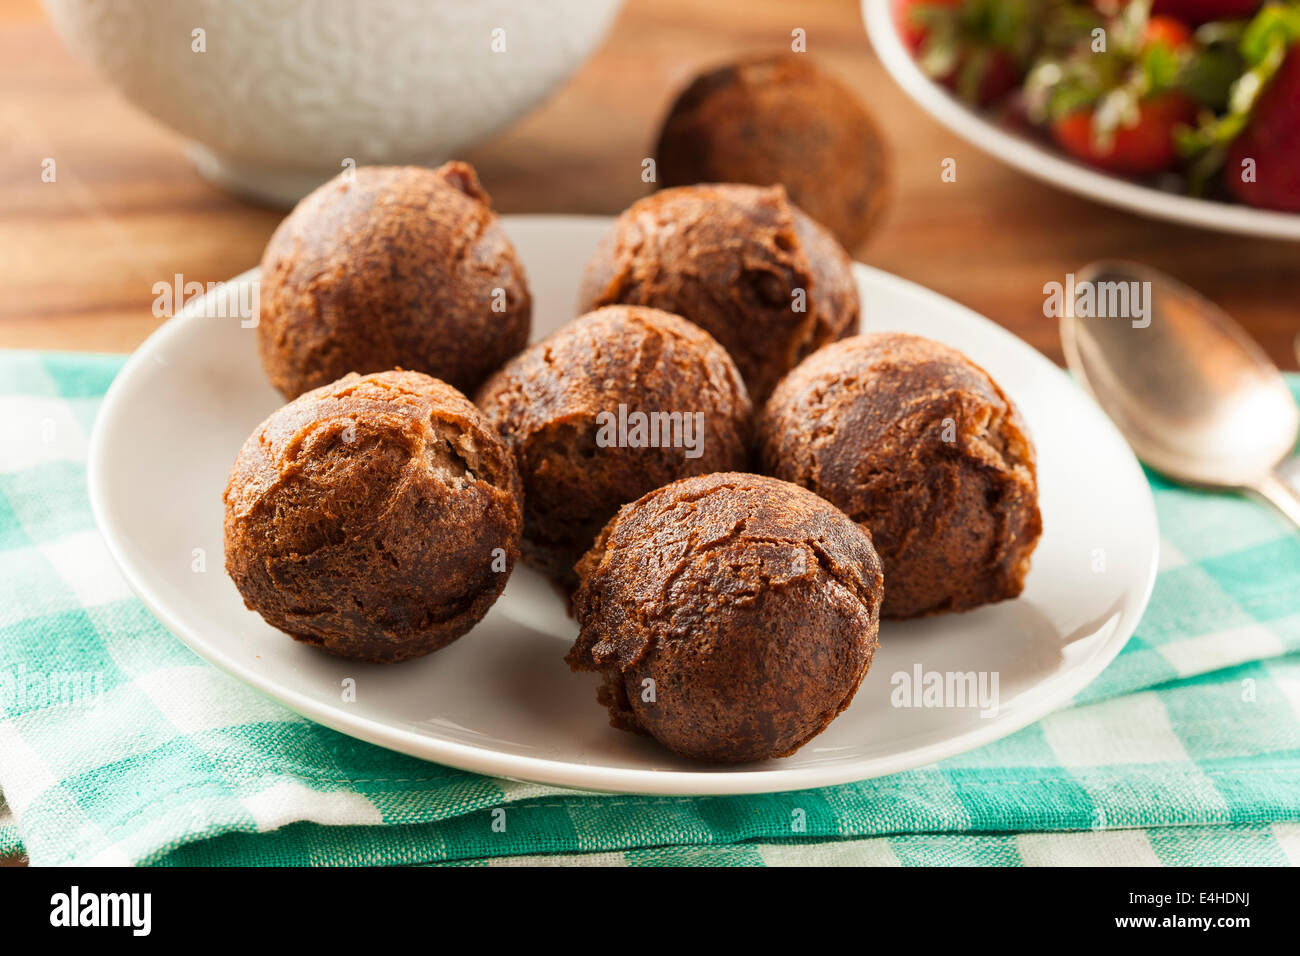 Homemade Chocolate Donut Holes with Sugar for Breakfast Stock Photo